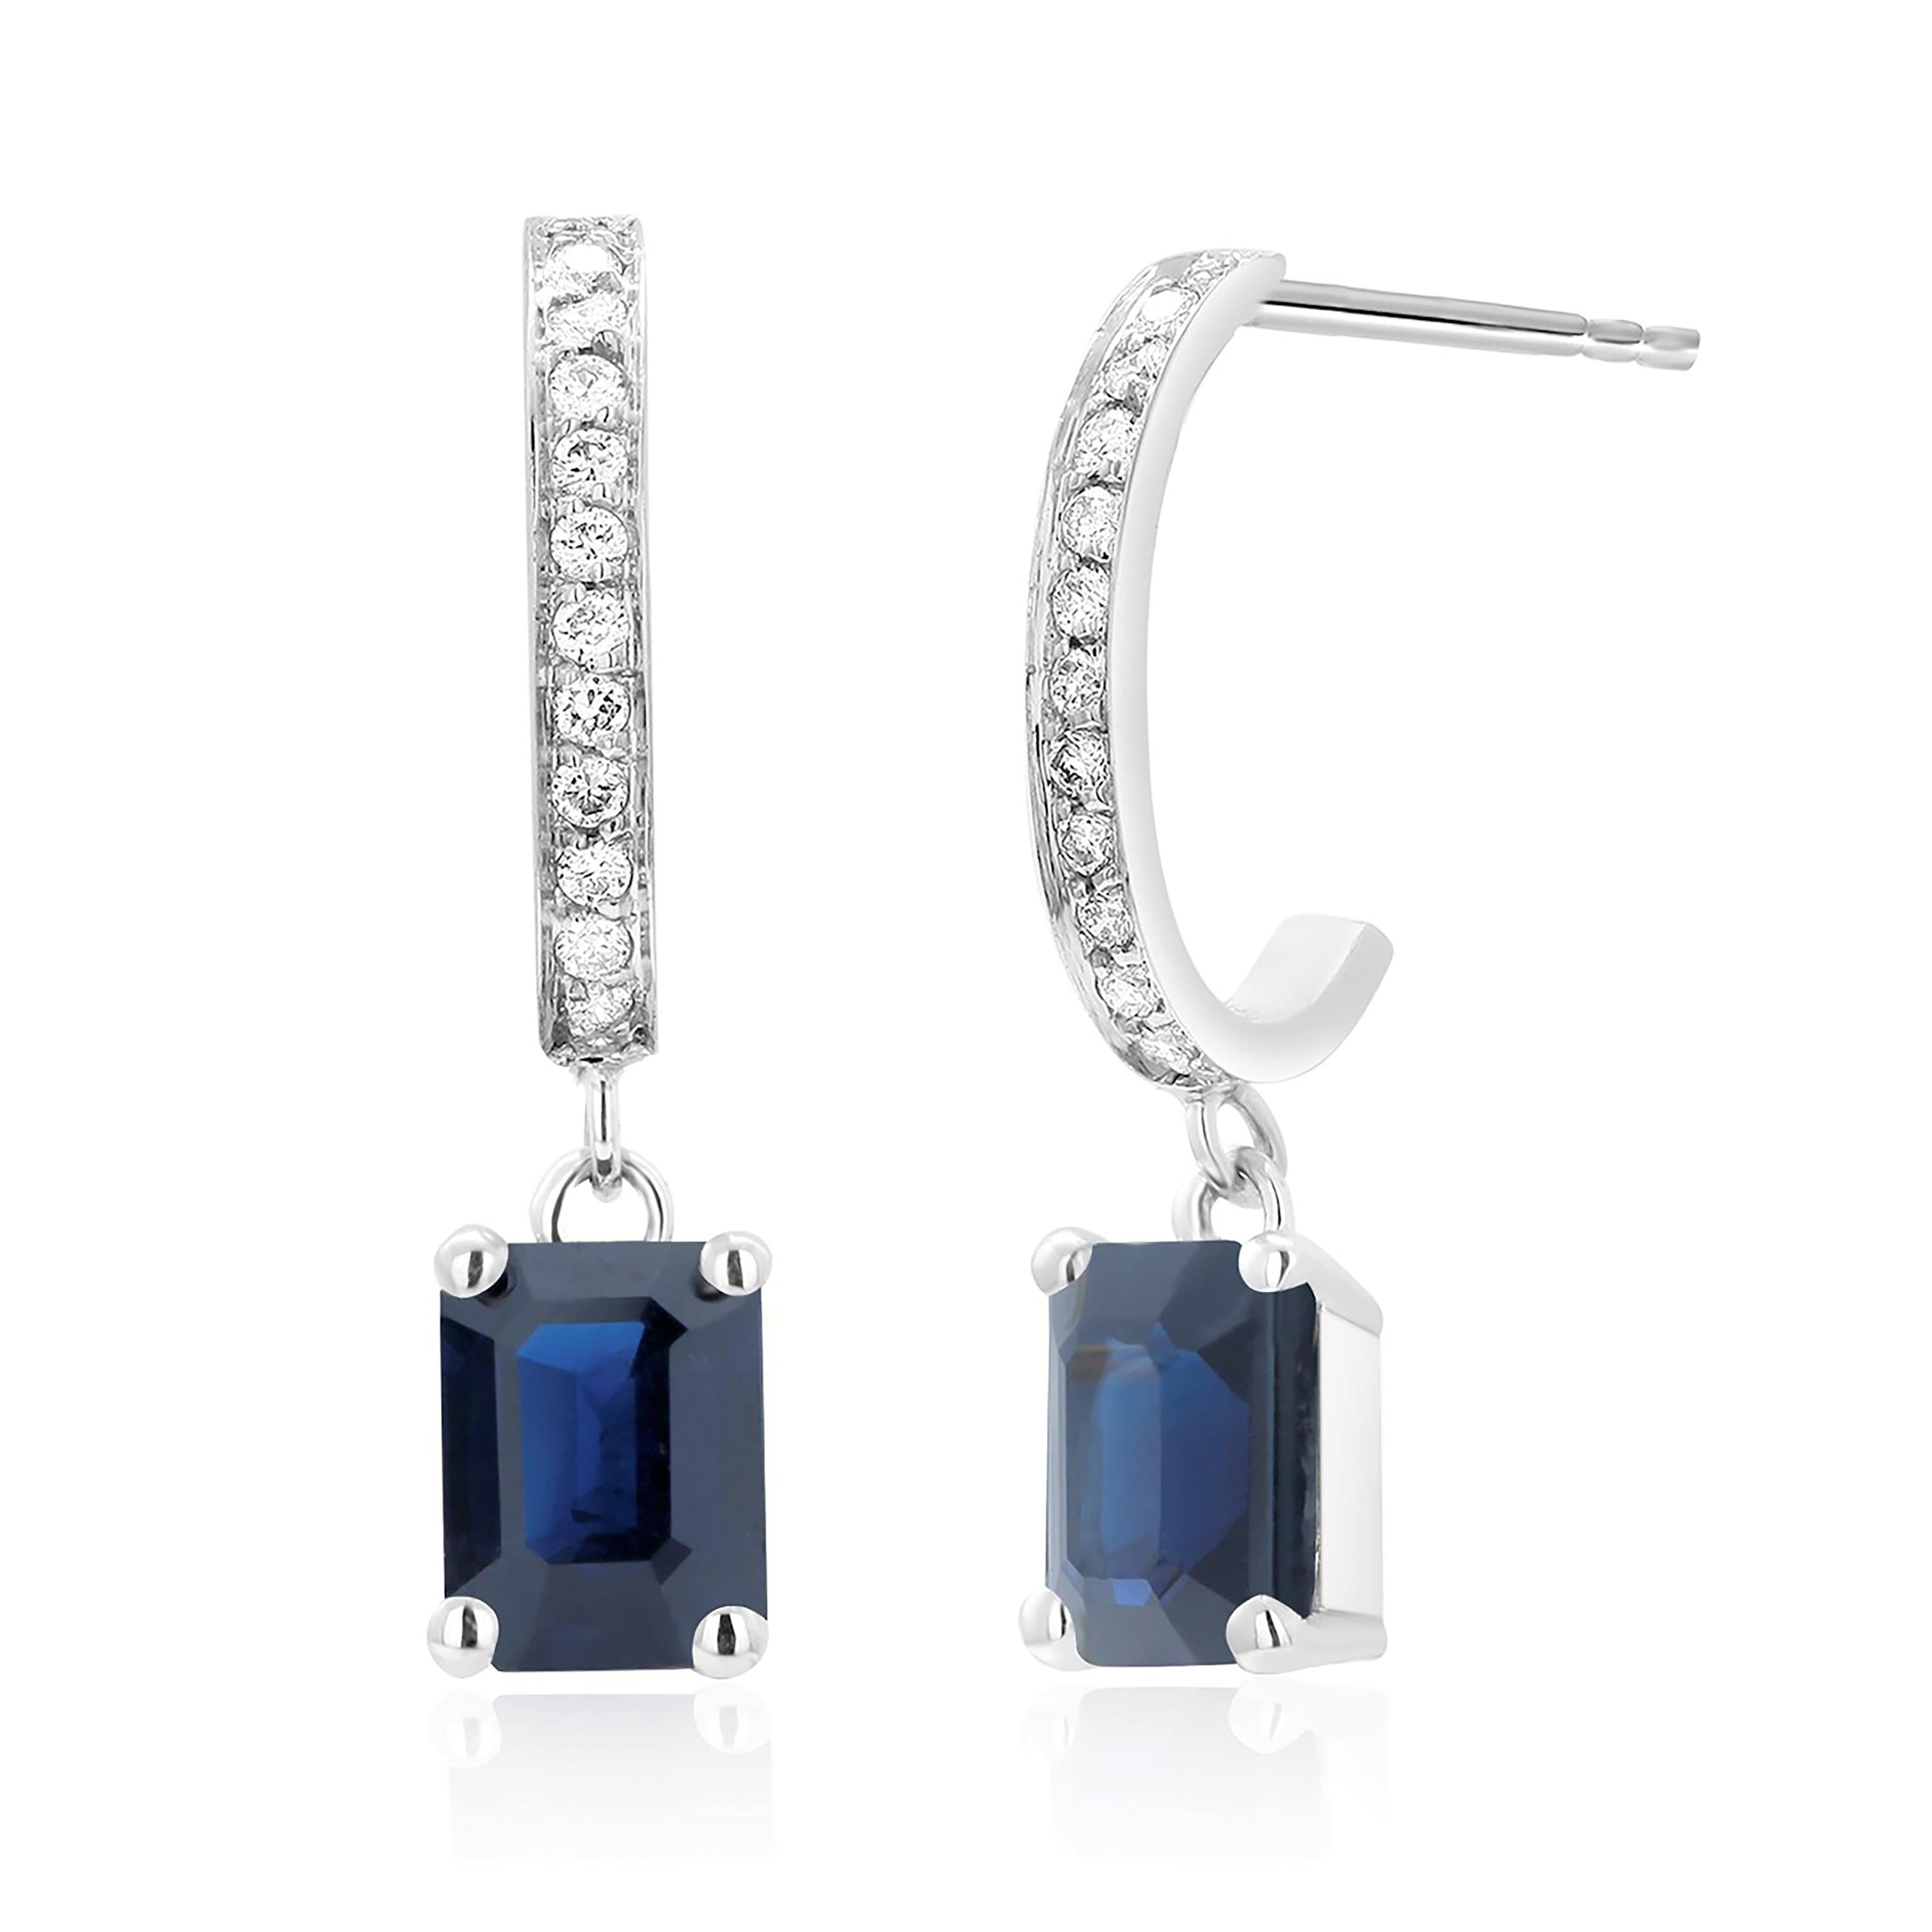 Contemporary White Gold Diamond Hoop Earrings with Emerald Shaped Sapphire